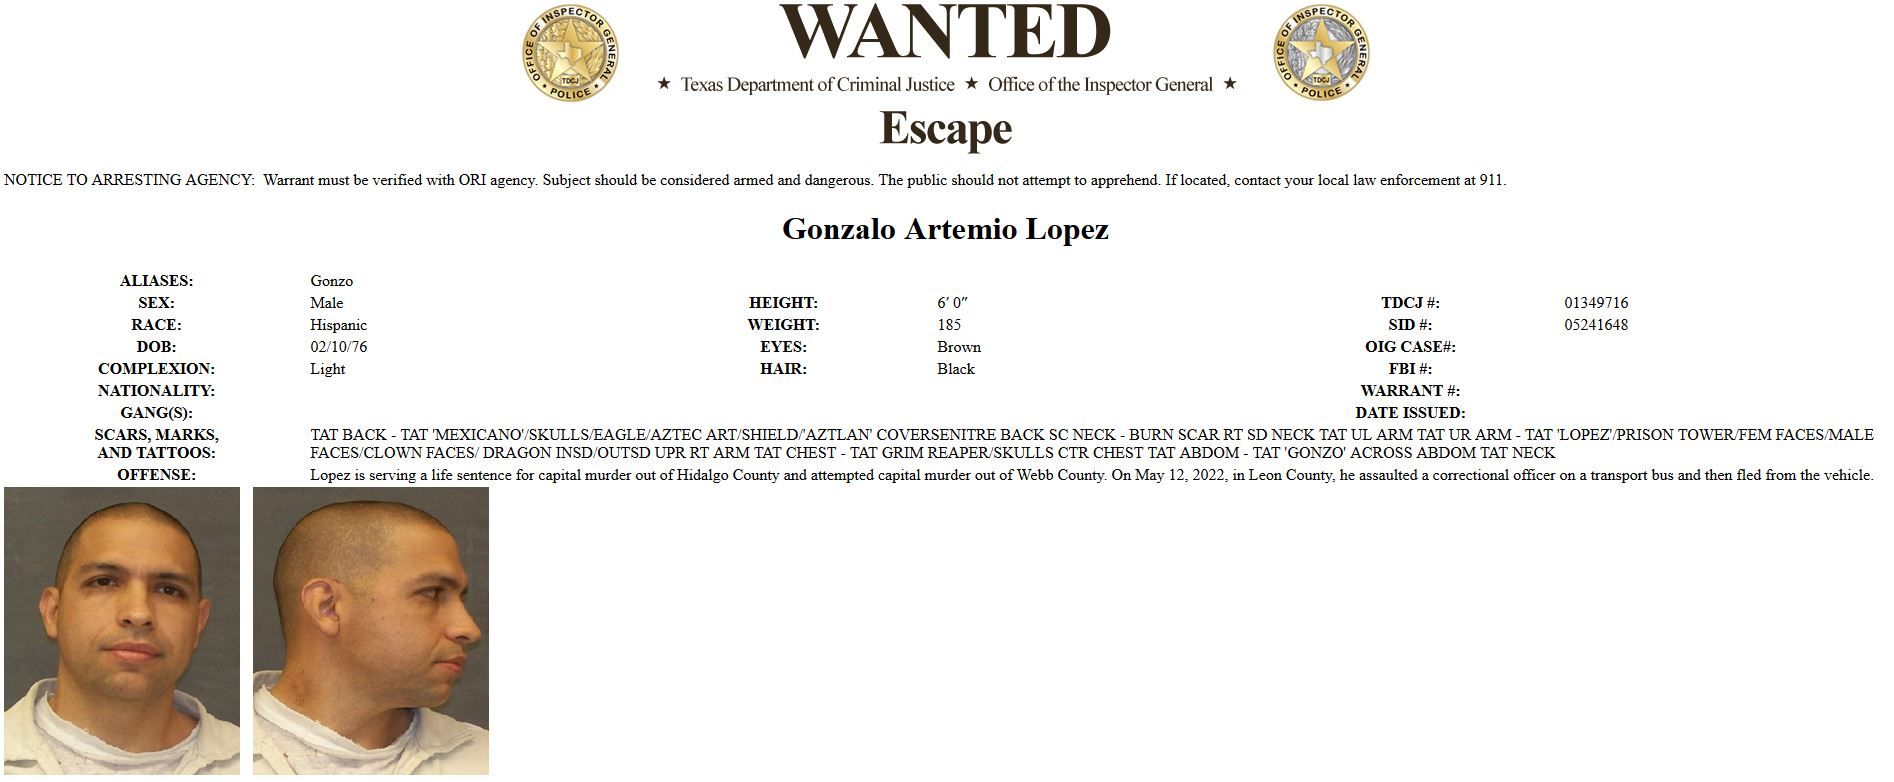 Lopez Wanted poster 5 13 2022.JPG